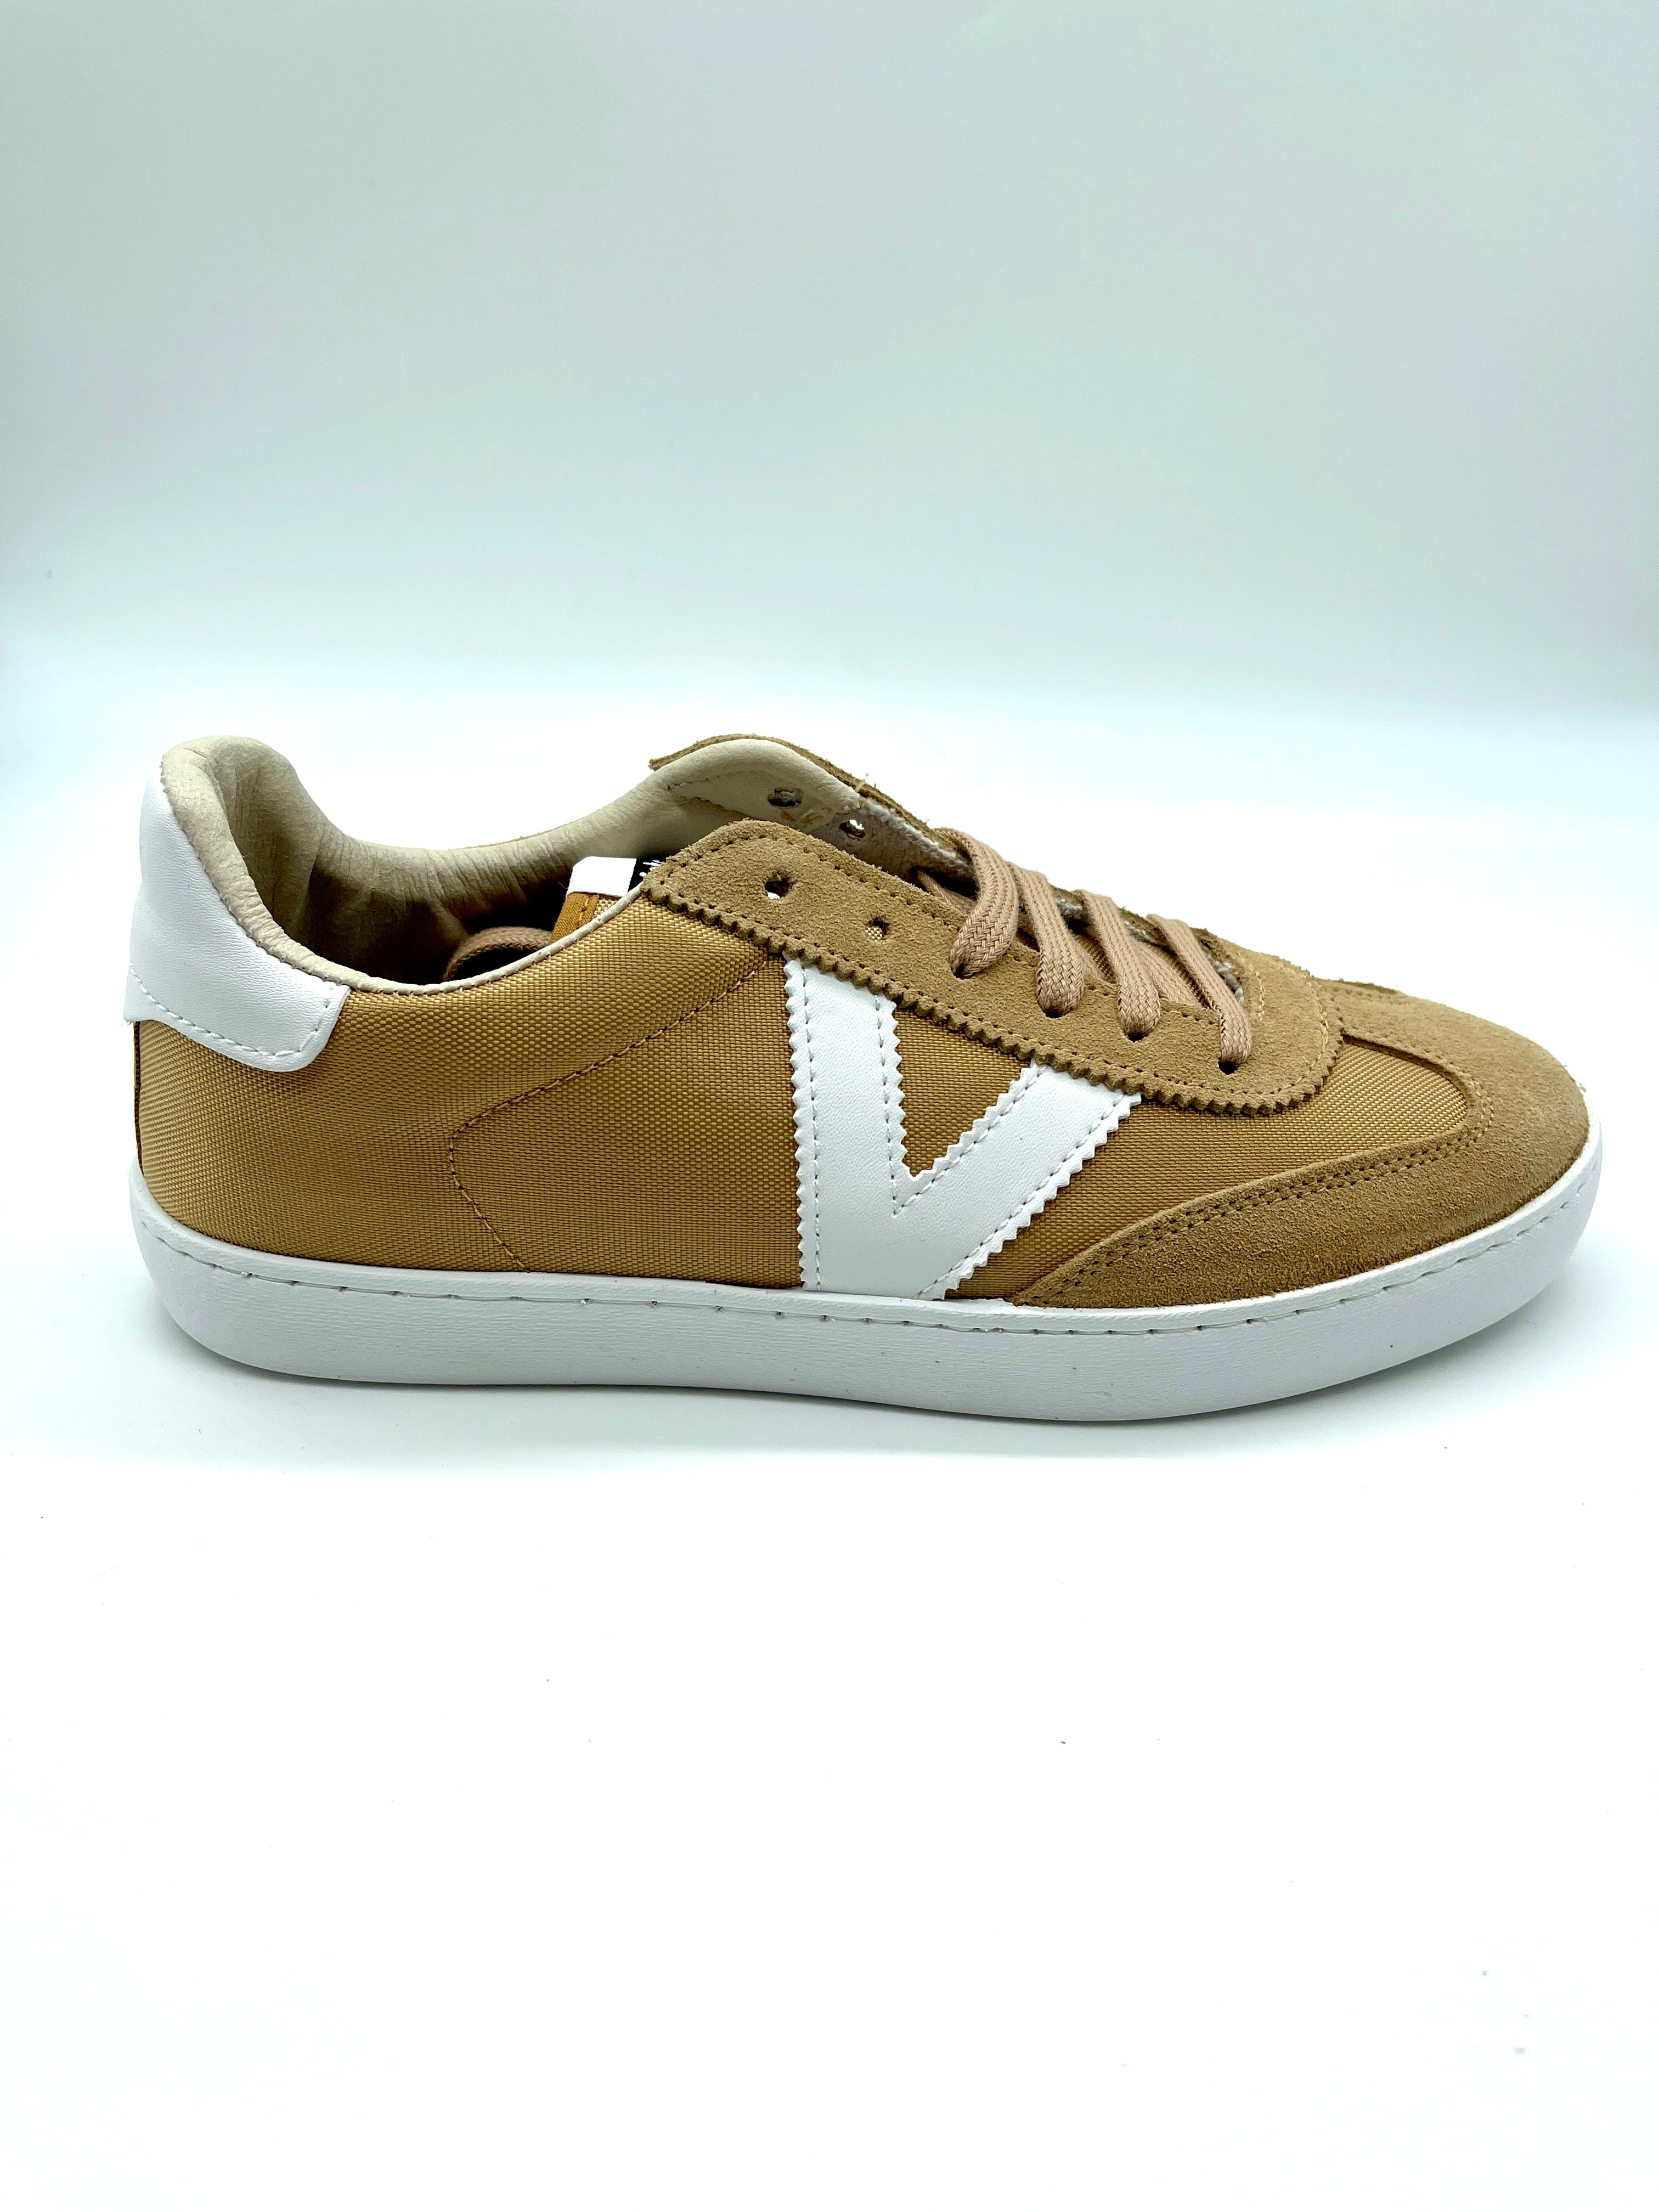 Victoria Berlin Leather and Nylon Sneakers in Taupe-312 Shoes-Little Bird Boutique